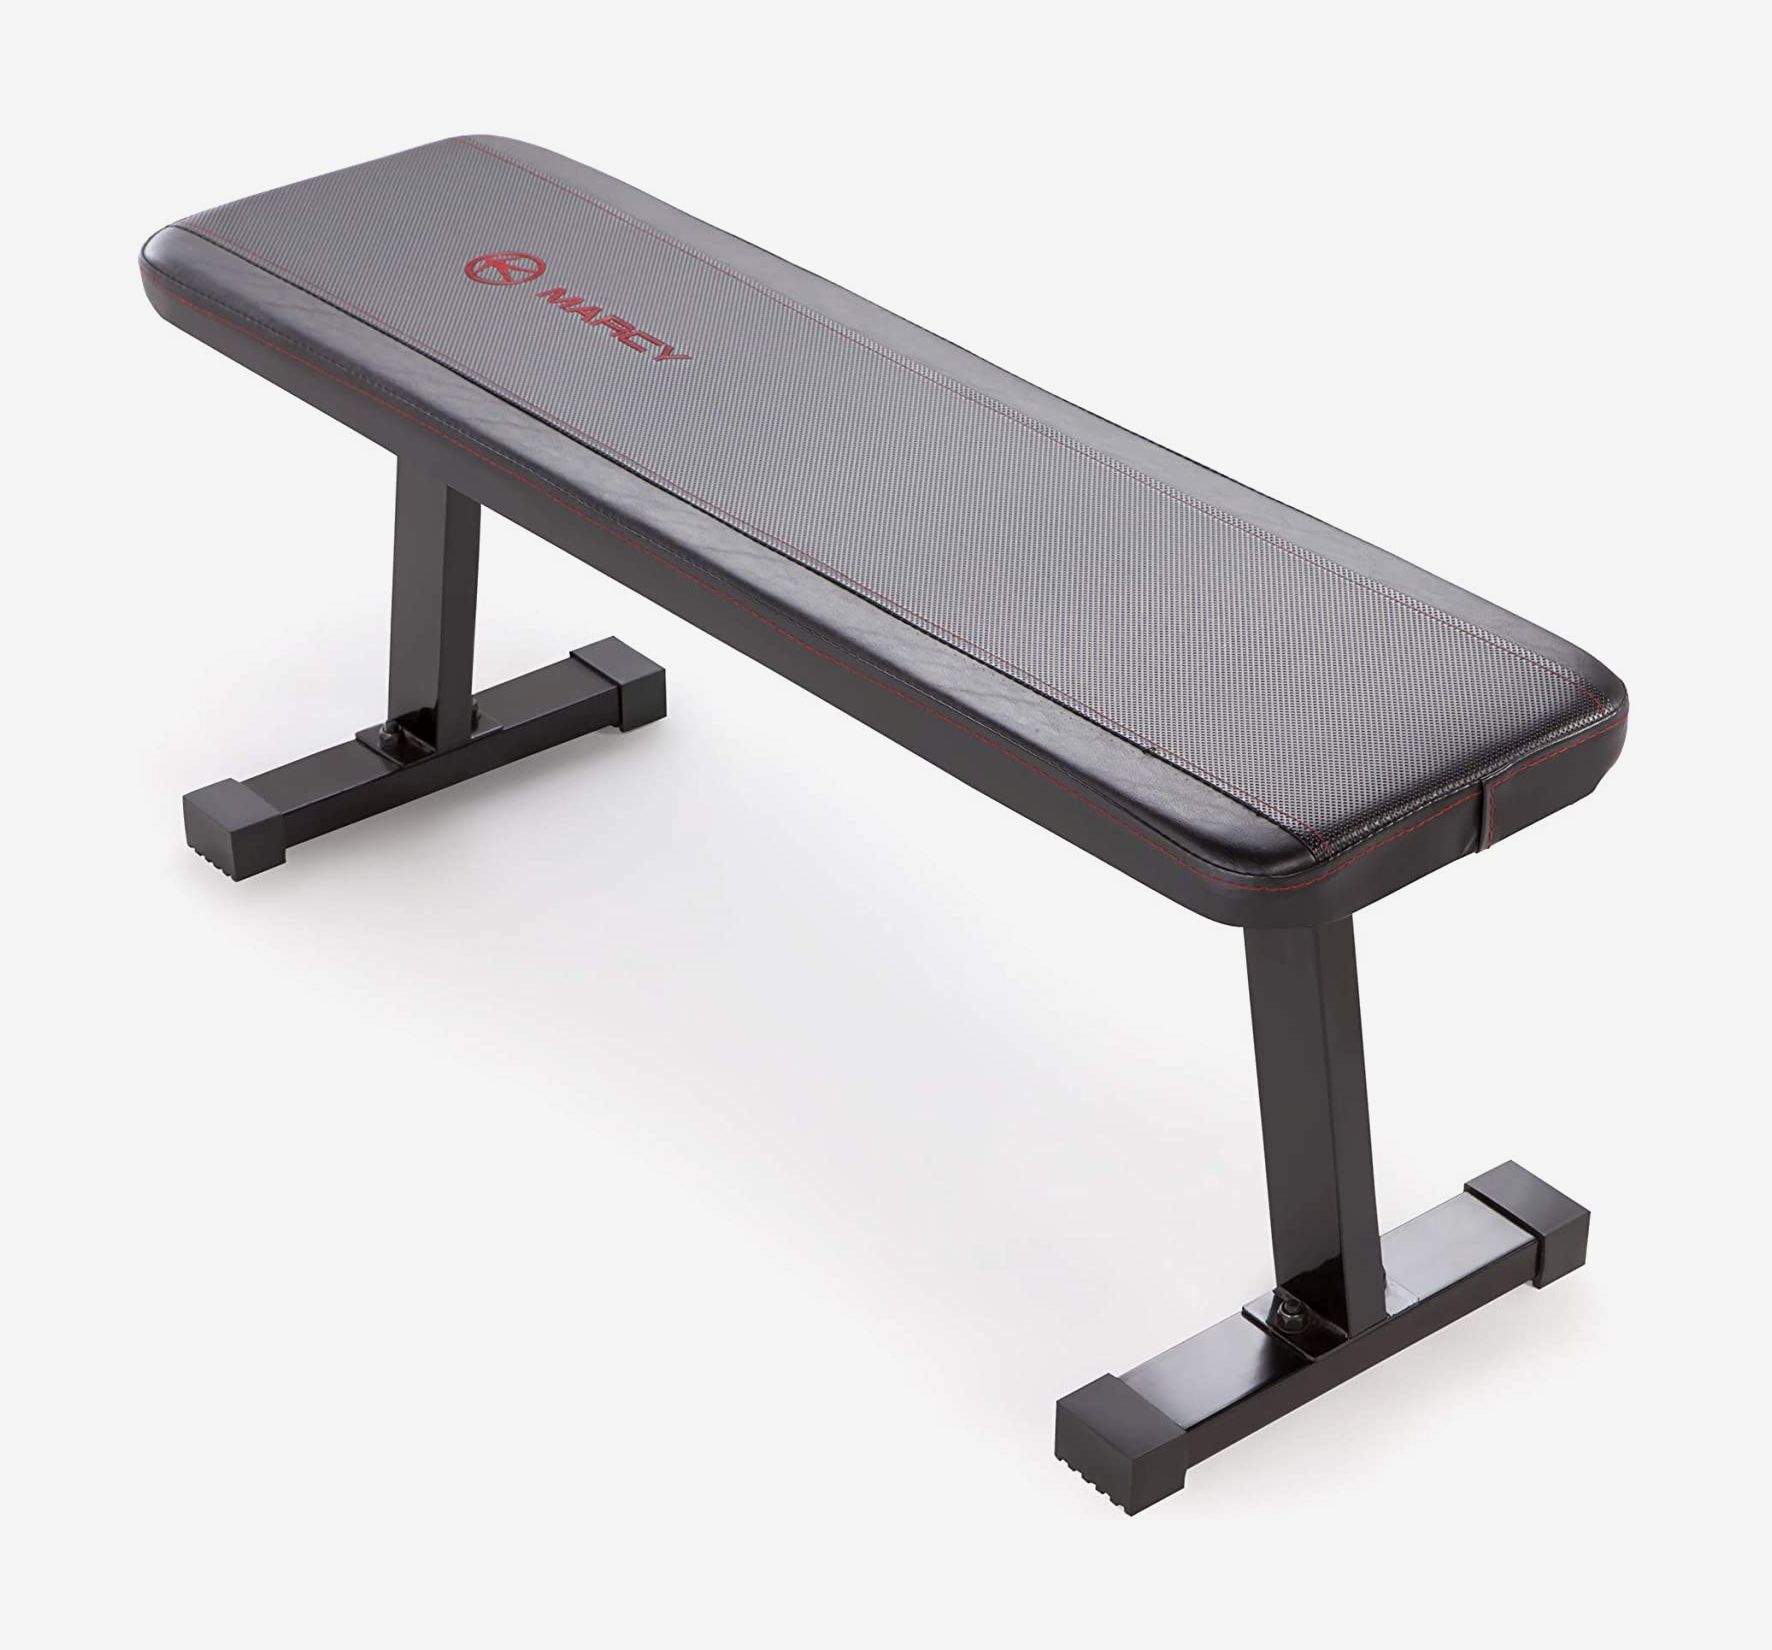 The 10 Best Weight Benches of 2022